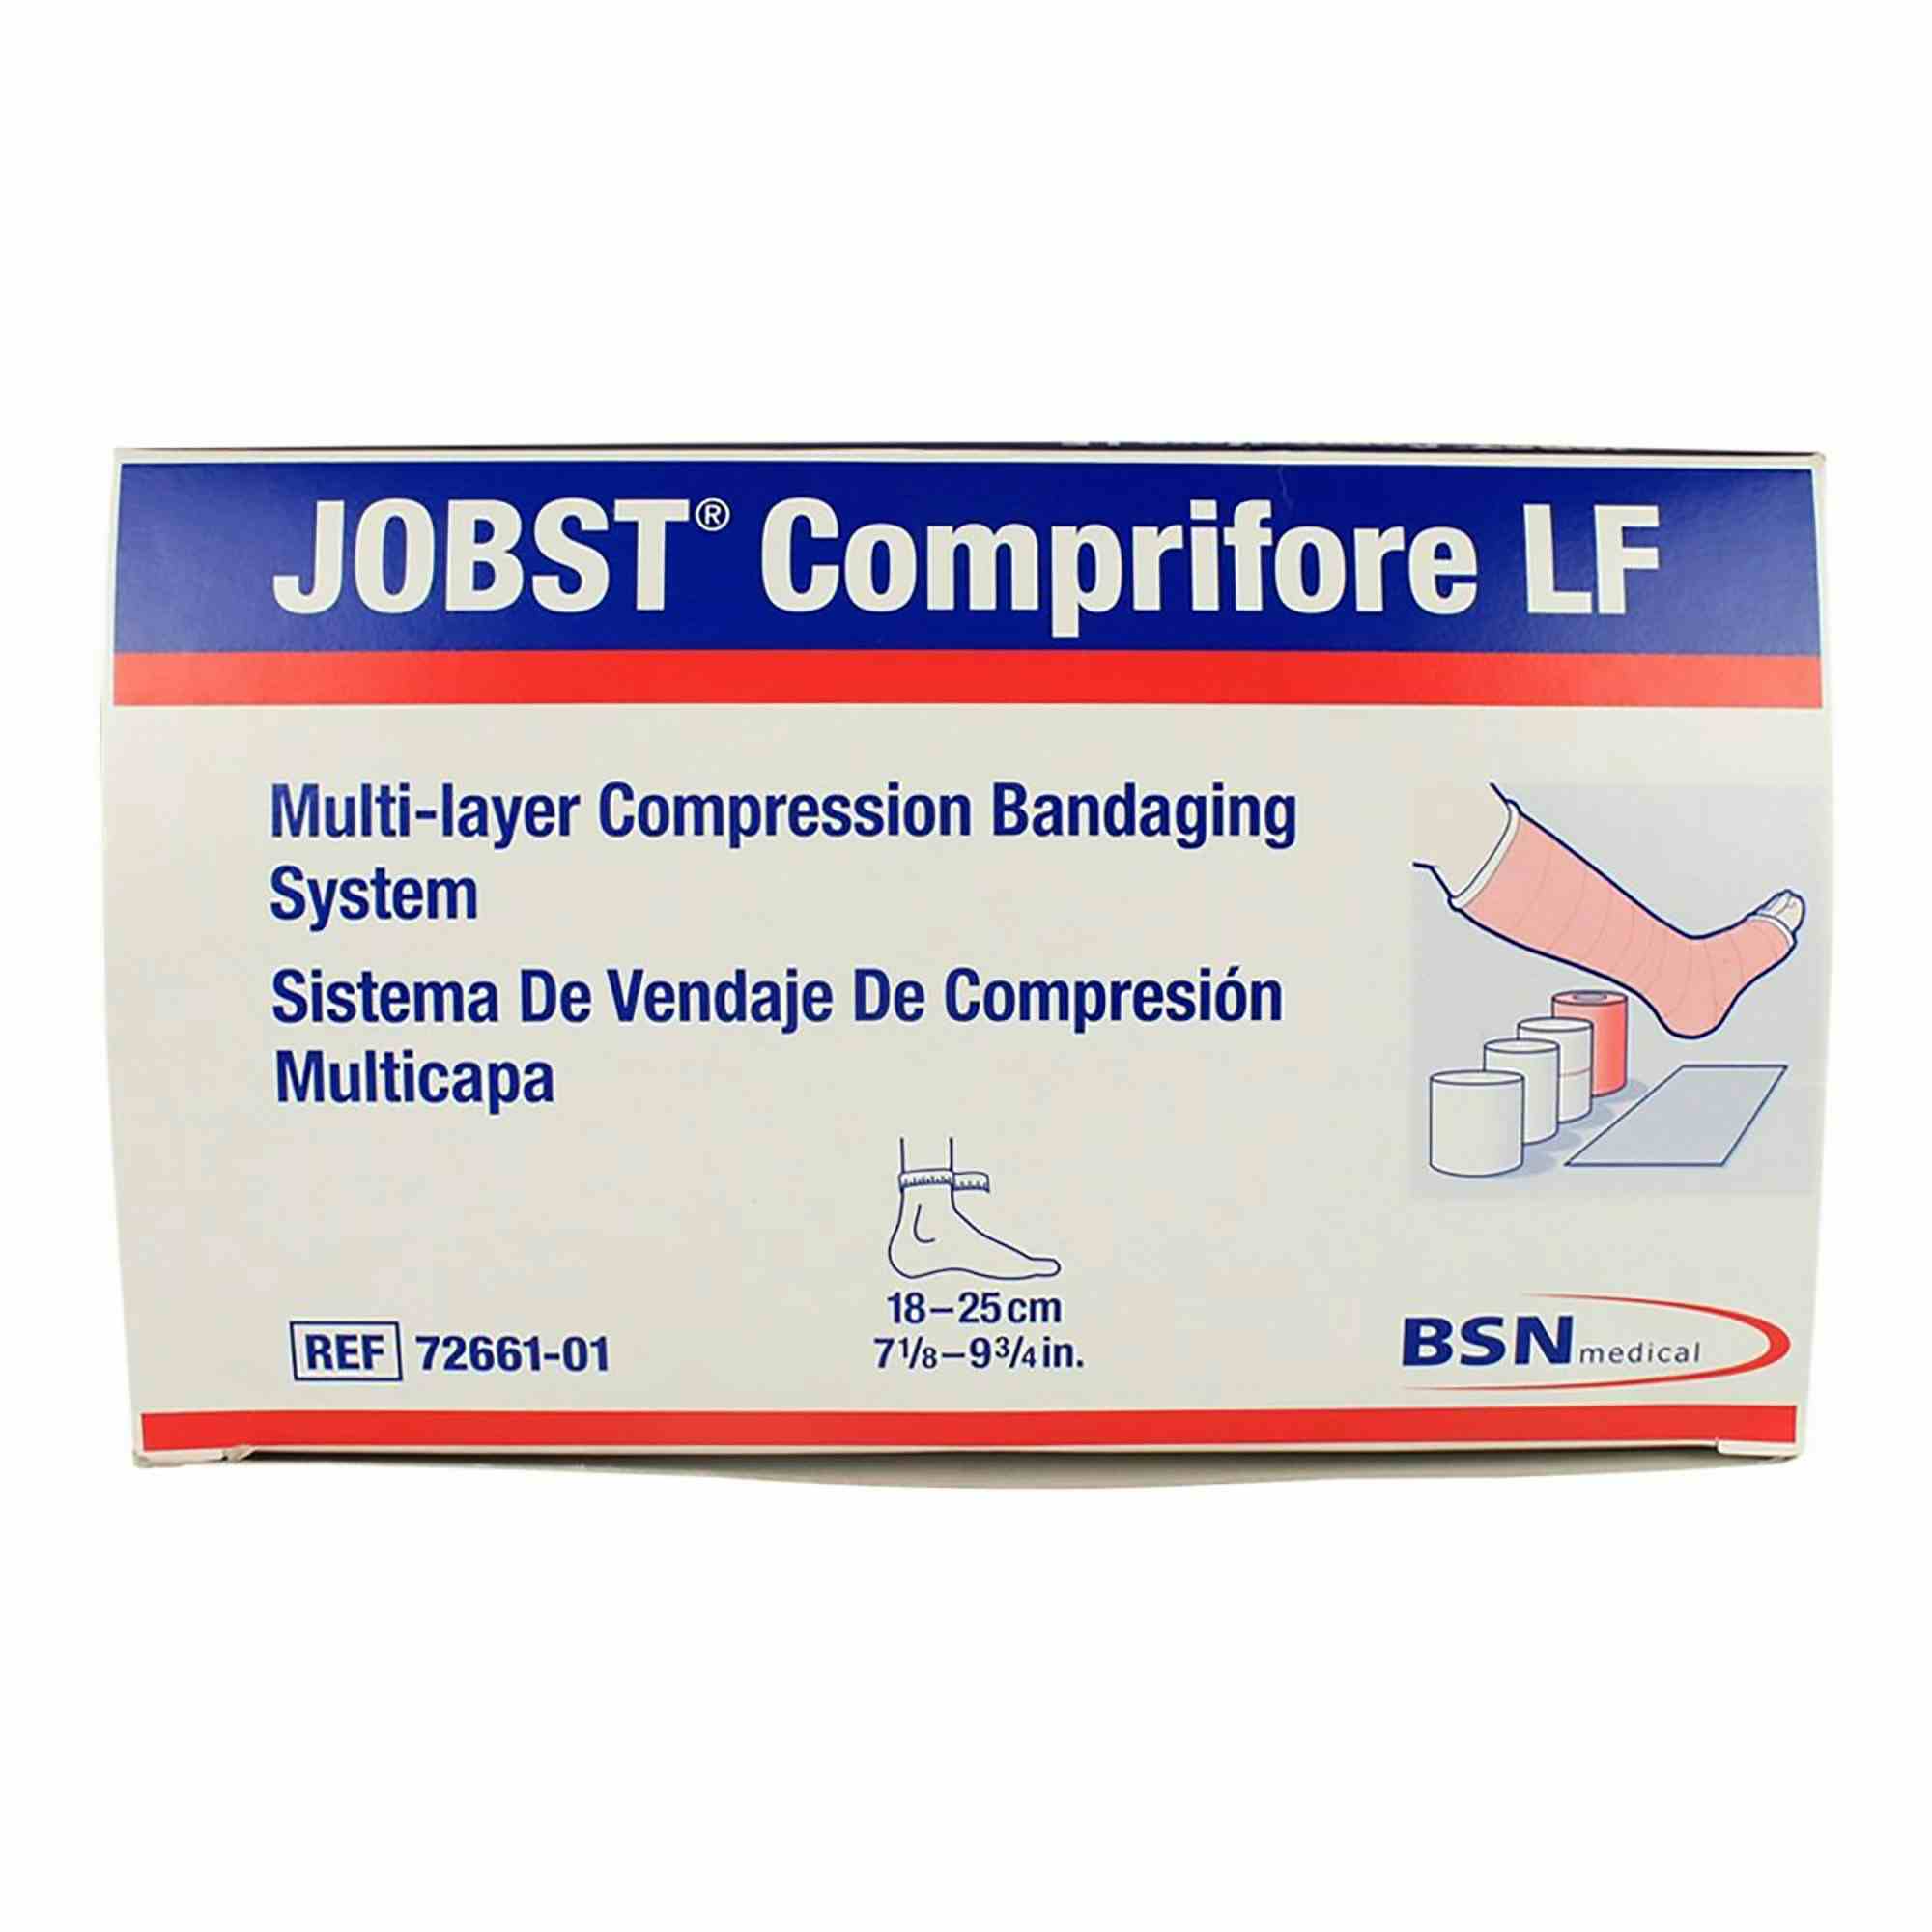 JOBST Comprifore LF Multi-Layer Compression Bandaging System, 4 Layers, 7266101, 1 Kit